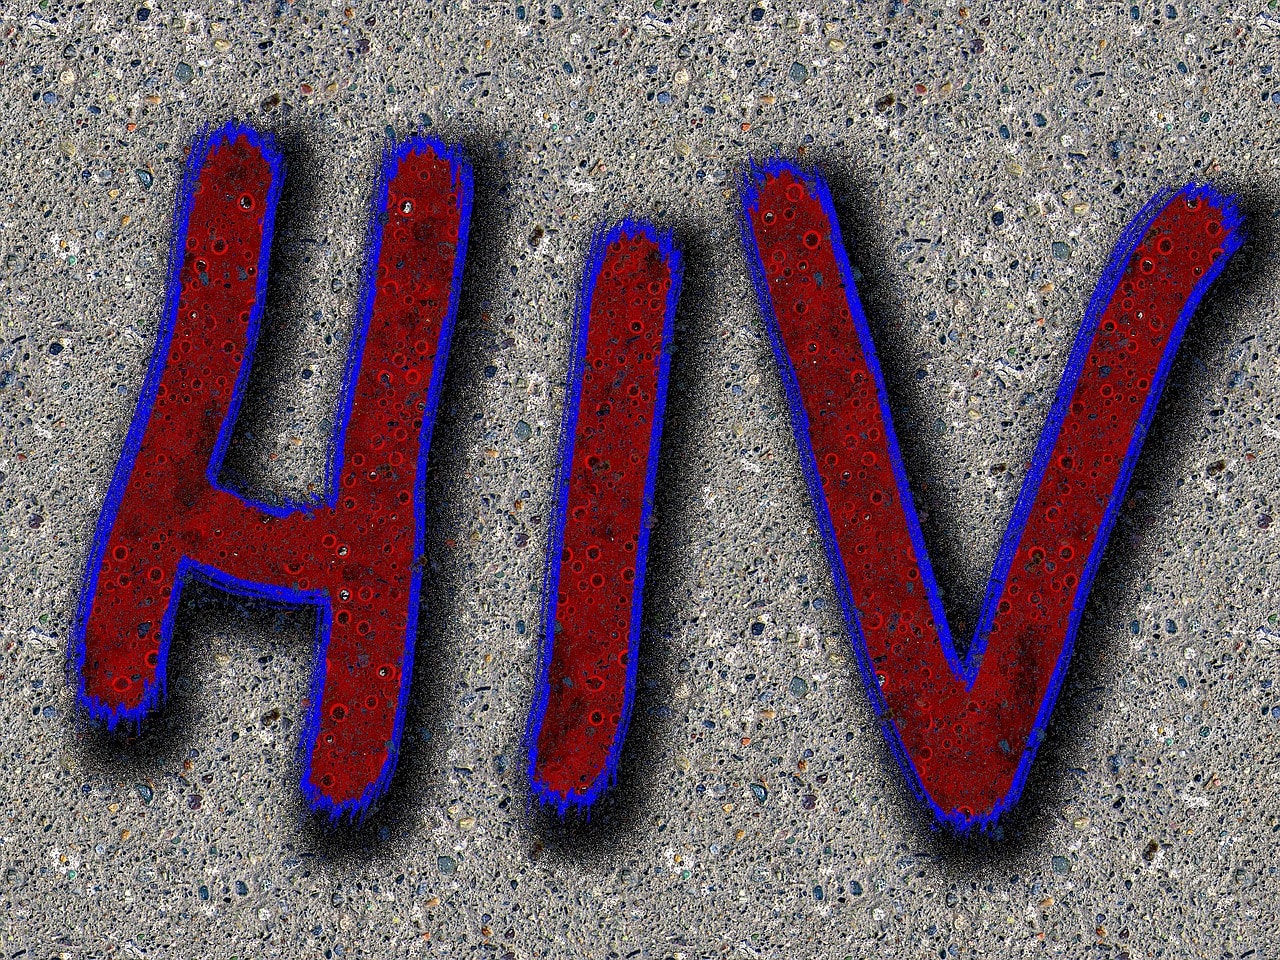 image HIV positive mother complains over treatment